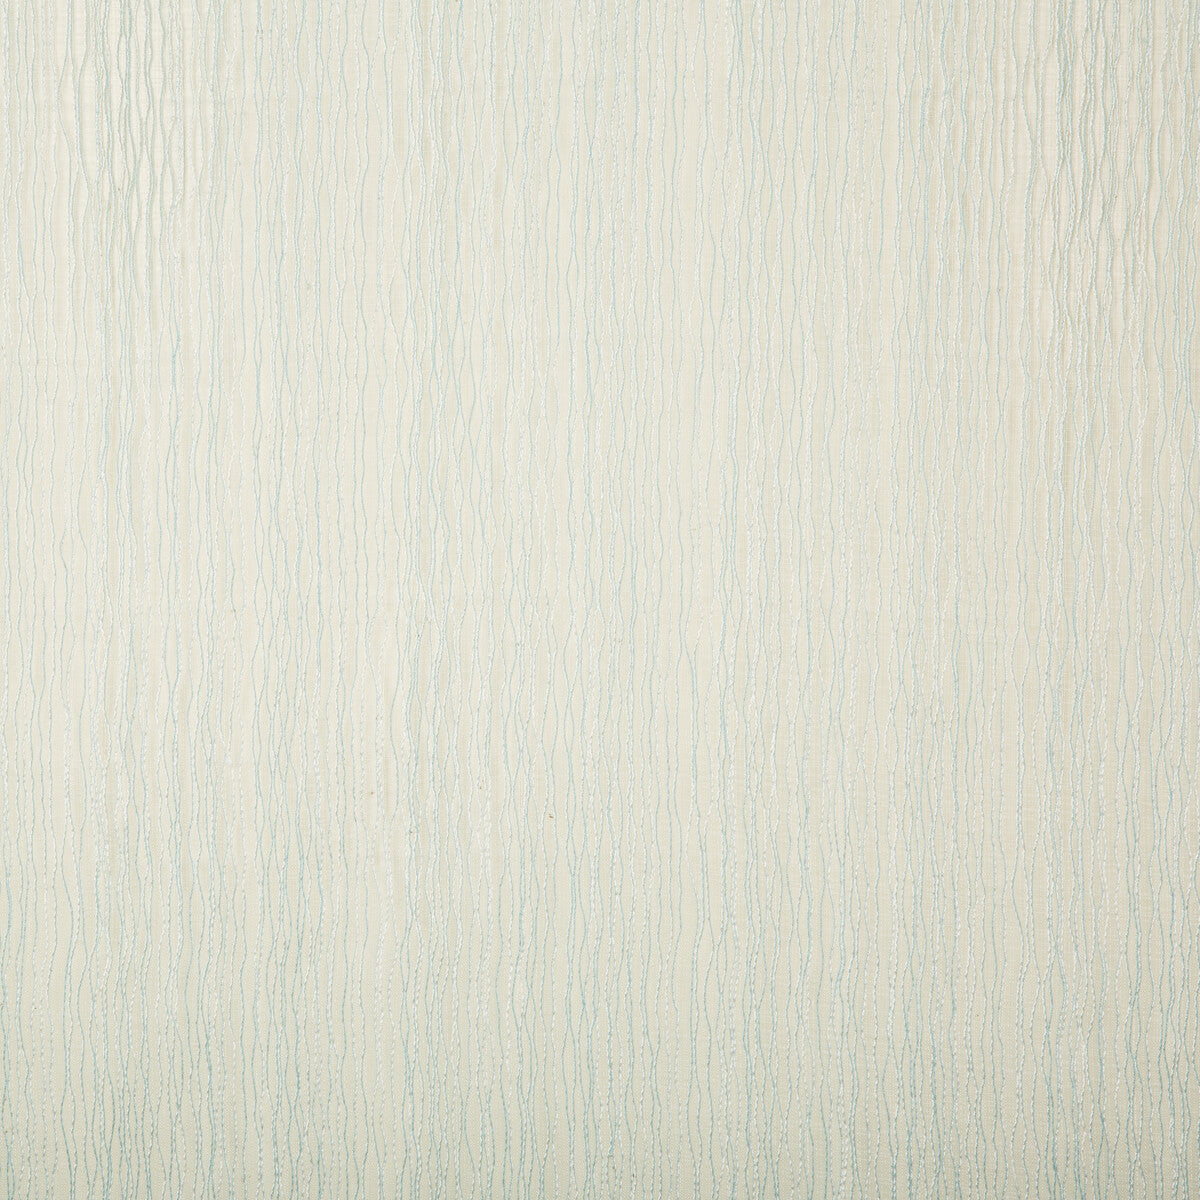 Adore fabric in seaglass color - pattern 4775.13.0 - by Kravet Contract in the Kravet Cruise collection